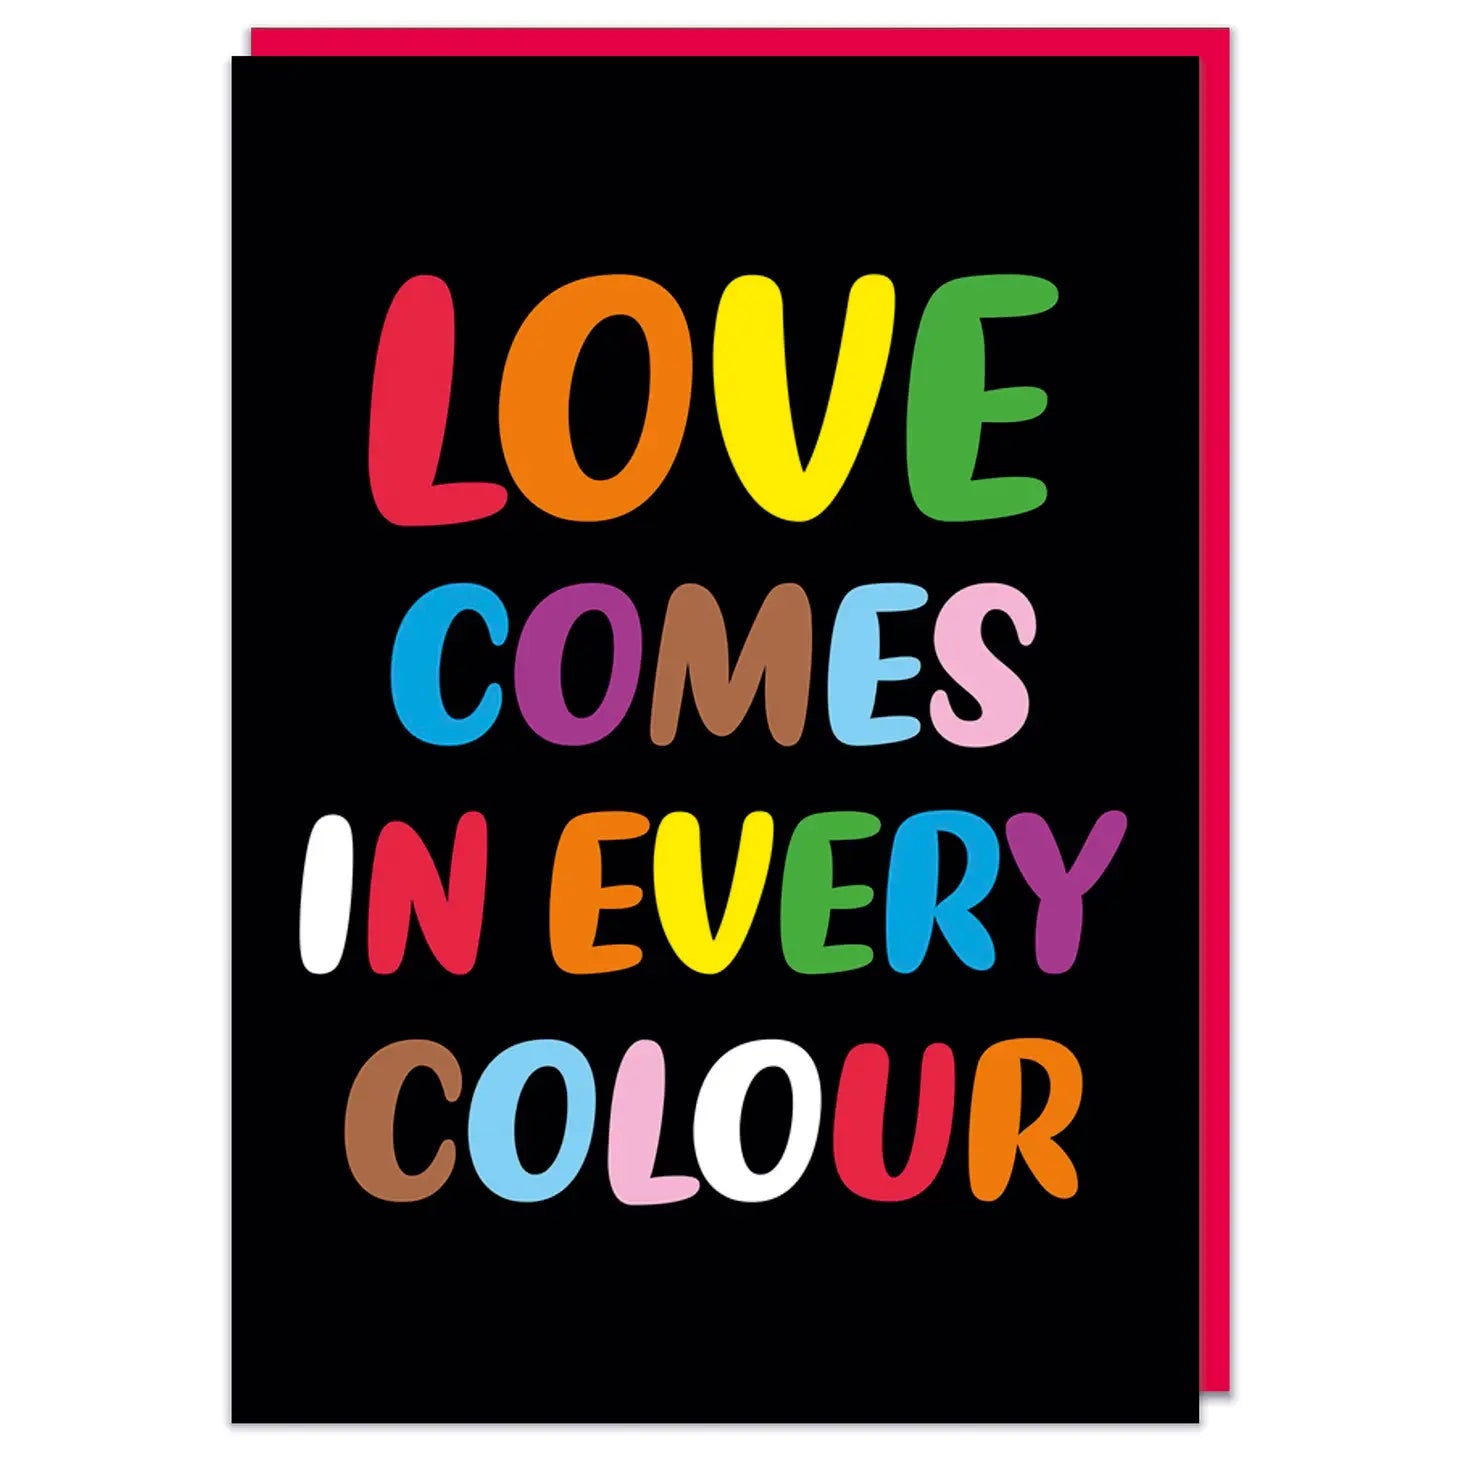 Love Comes in Every Colour by Dean Morris